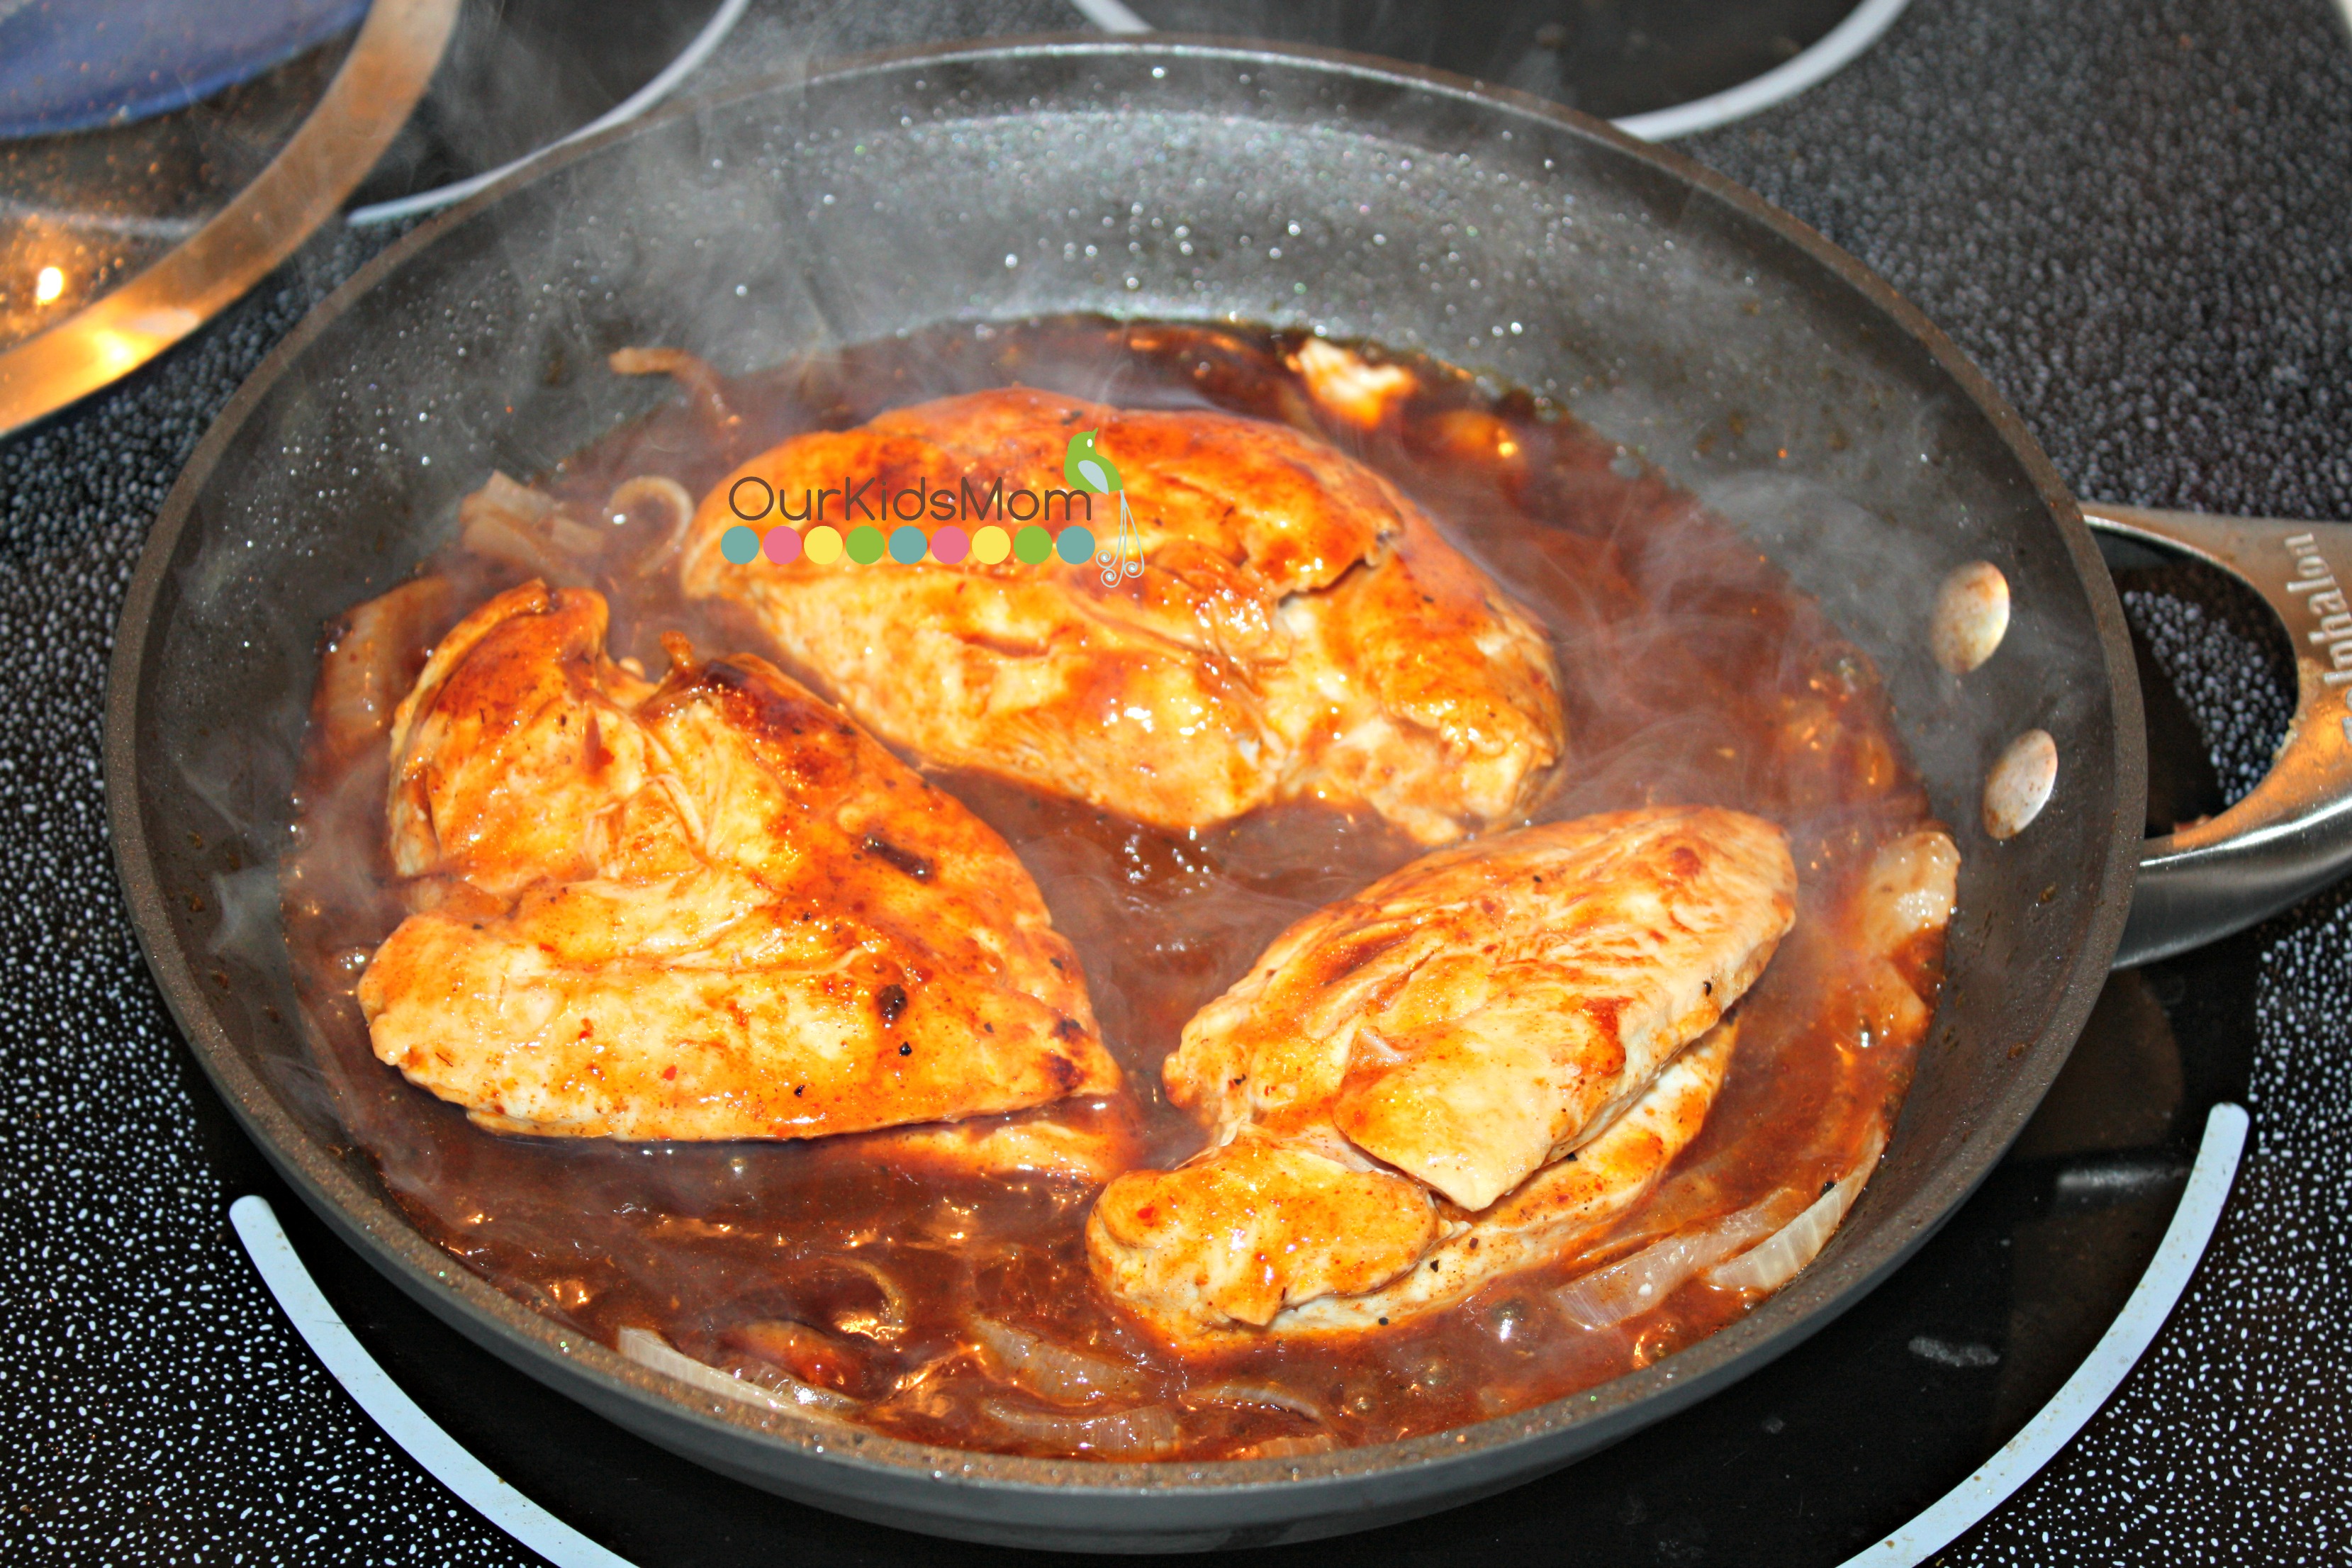 Cooking the chicken